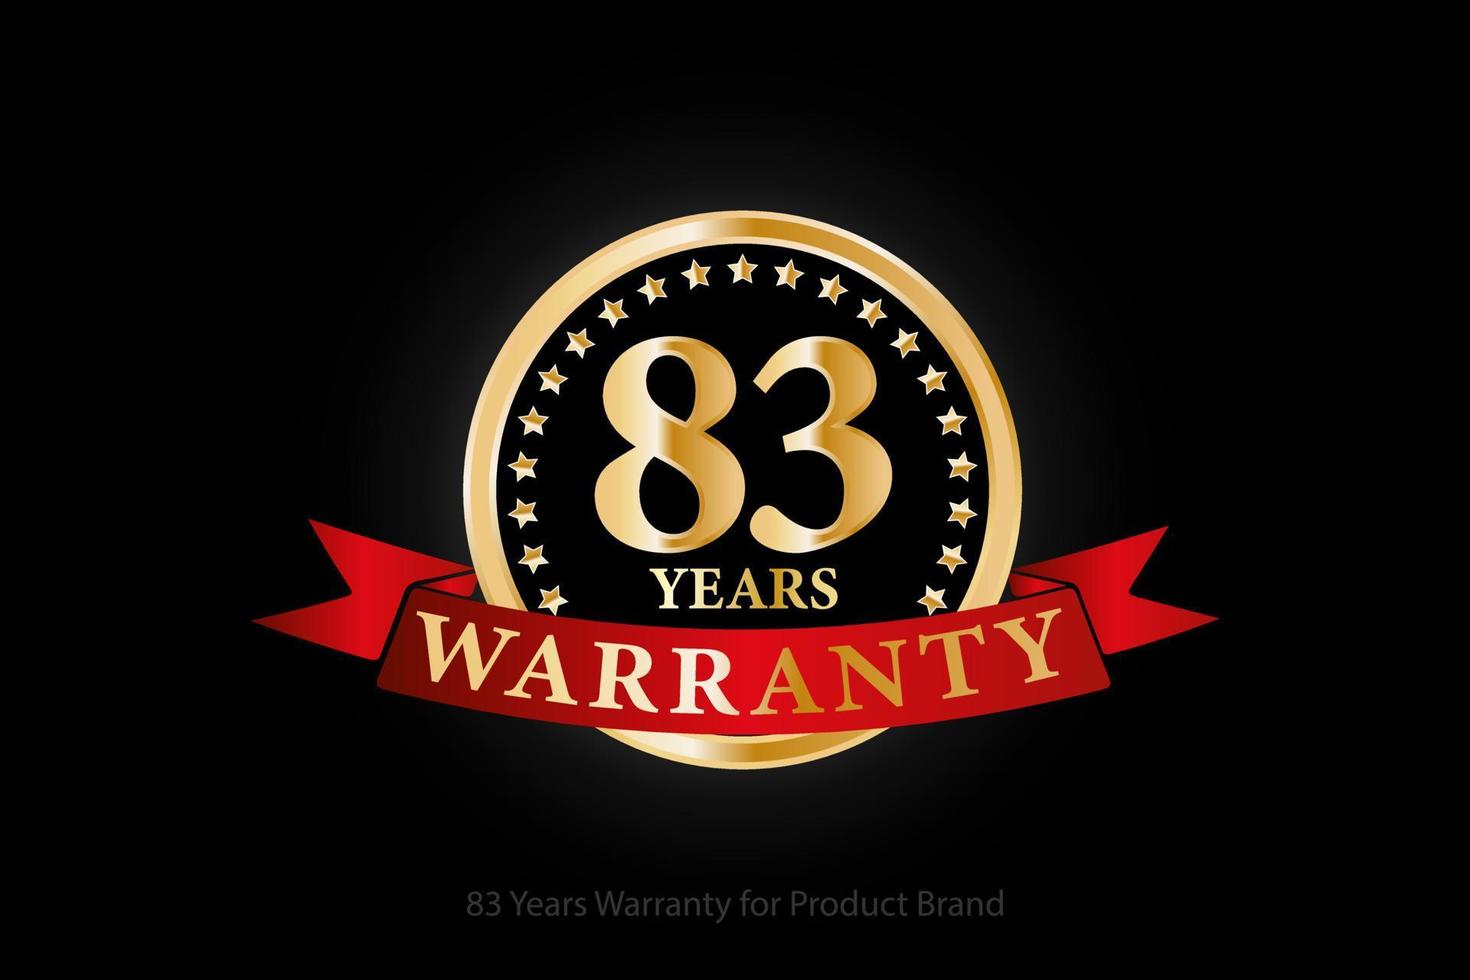 83 years warranty golden logo with ring and red ribbon isolated on black background, vector design for product warranty, guarantee, service, corporate, and your business.